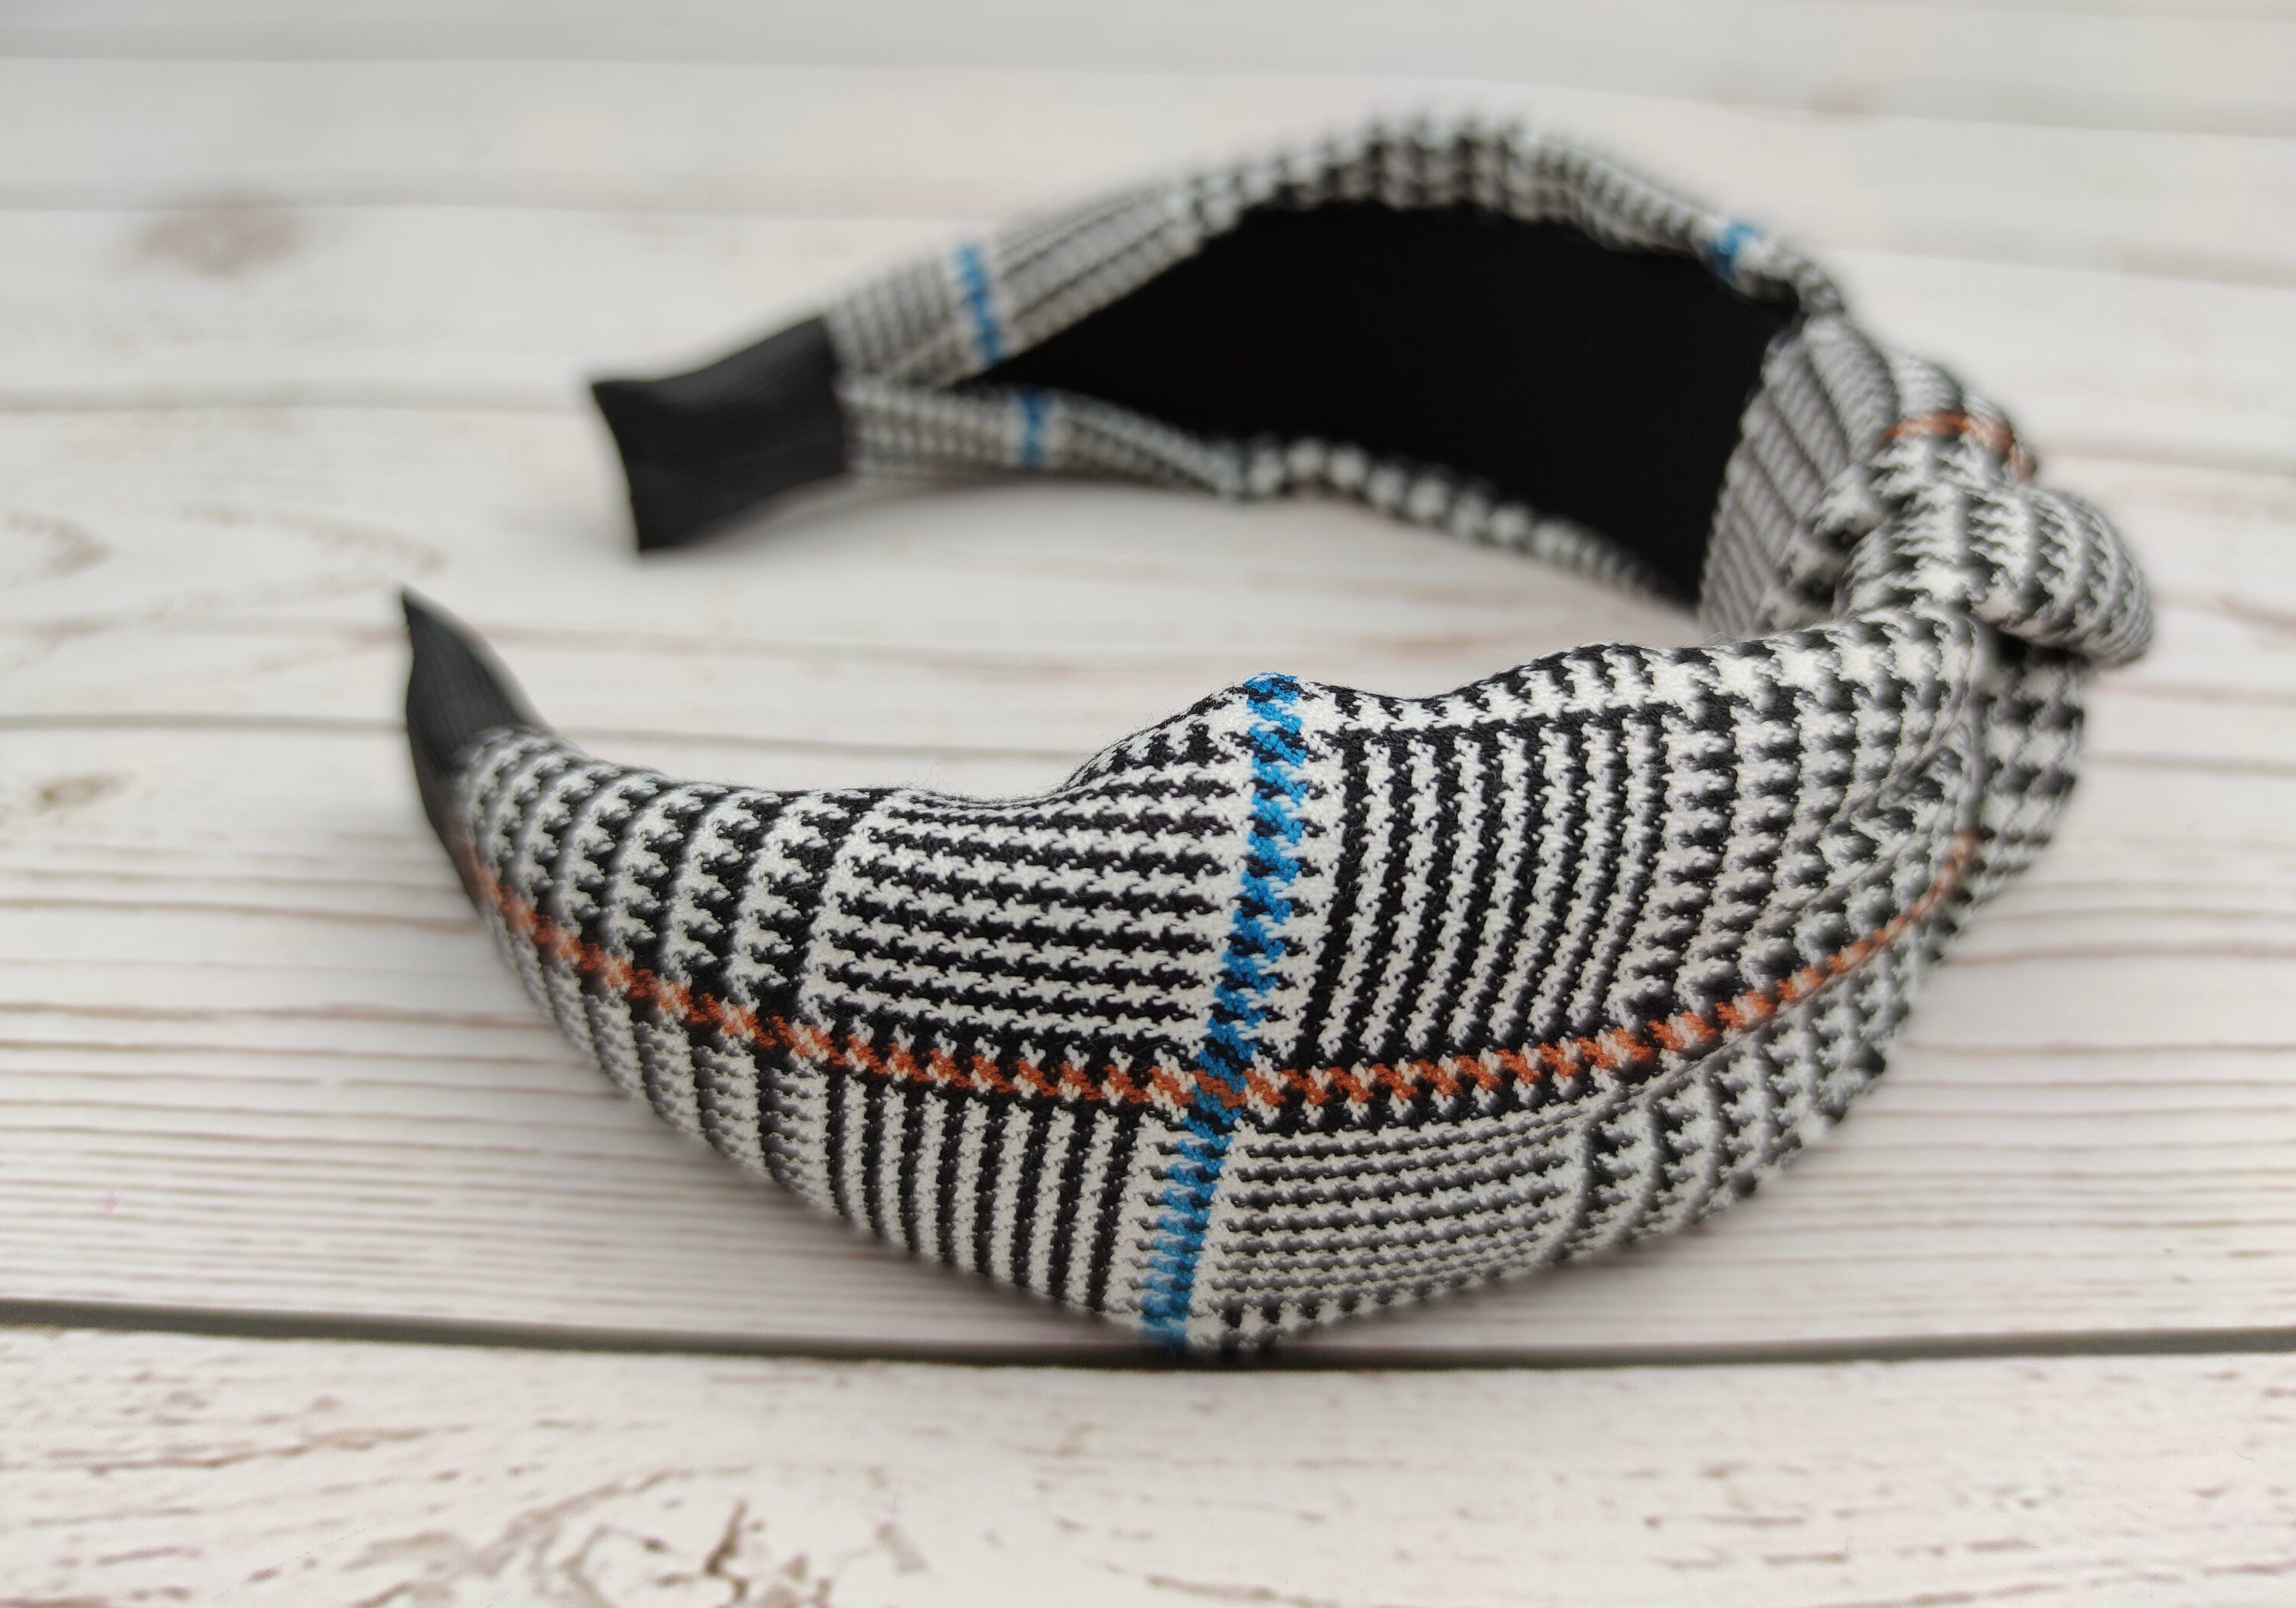 Make a statement with this crepe-knotted headband in white and black, a versatile accessory for any hair type.